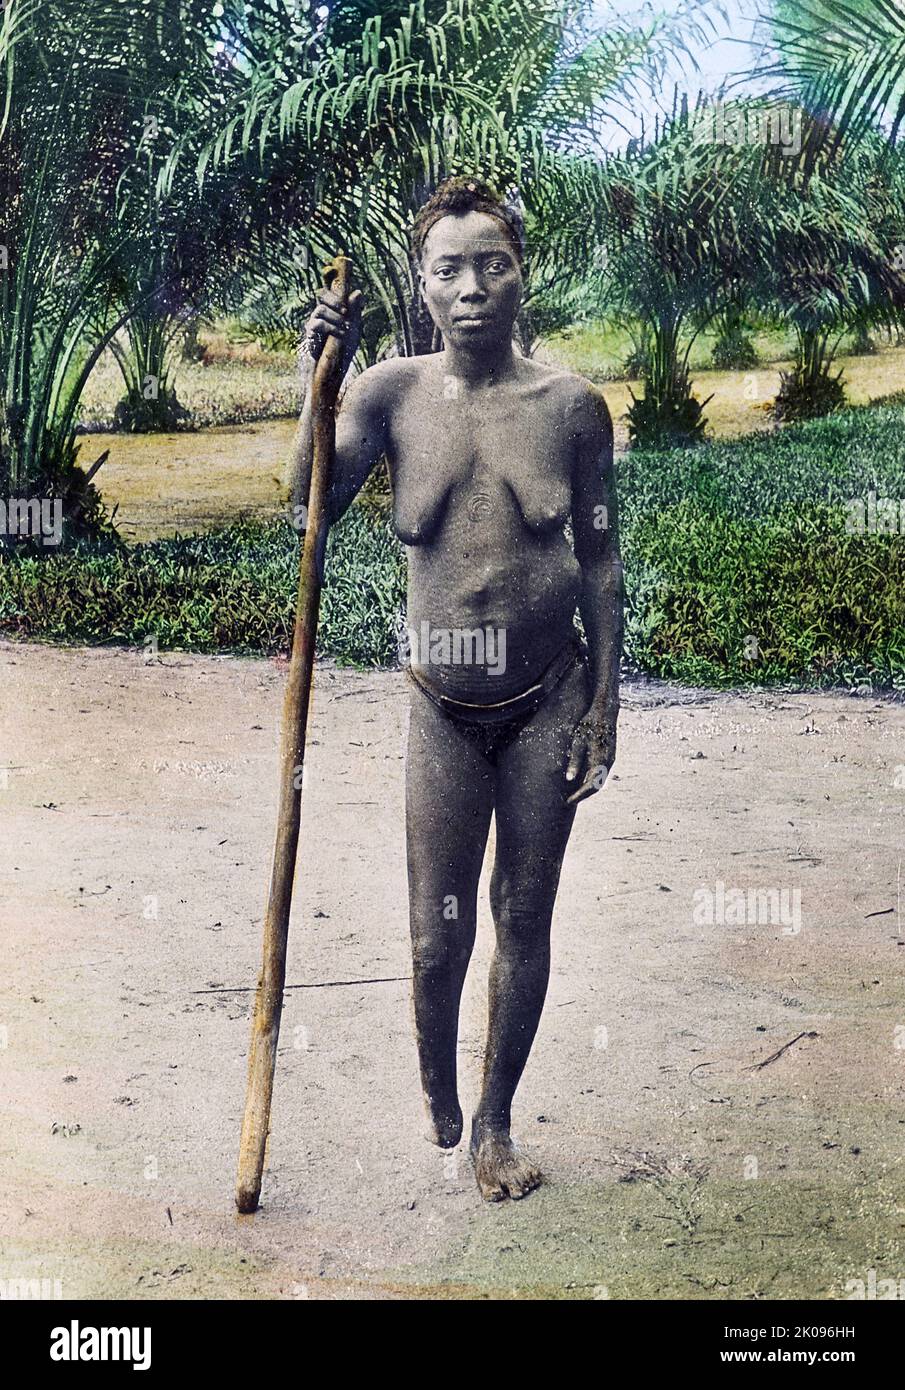 King Leopold II of Belgium's administration of the Congo Free State was characterised by atrocities, including torture and murder, resulting from notorious systematic brutality. The hands of men, women, and children were amputated when the quota of rubber was not met and millions of the Congolese people died. Stock Photo